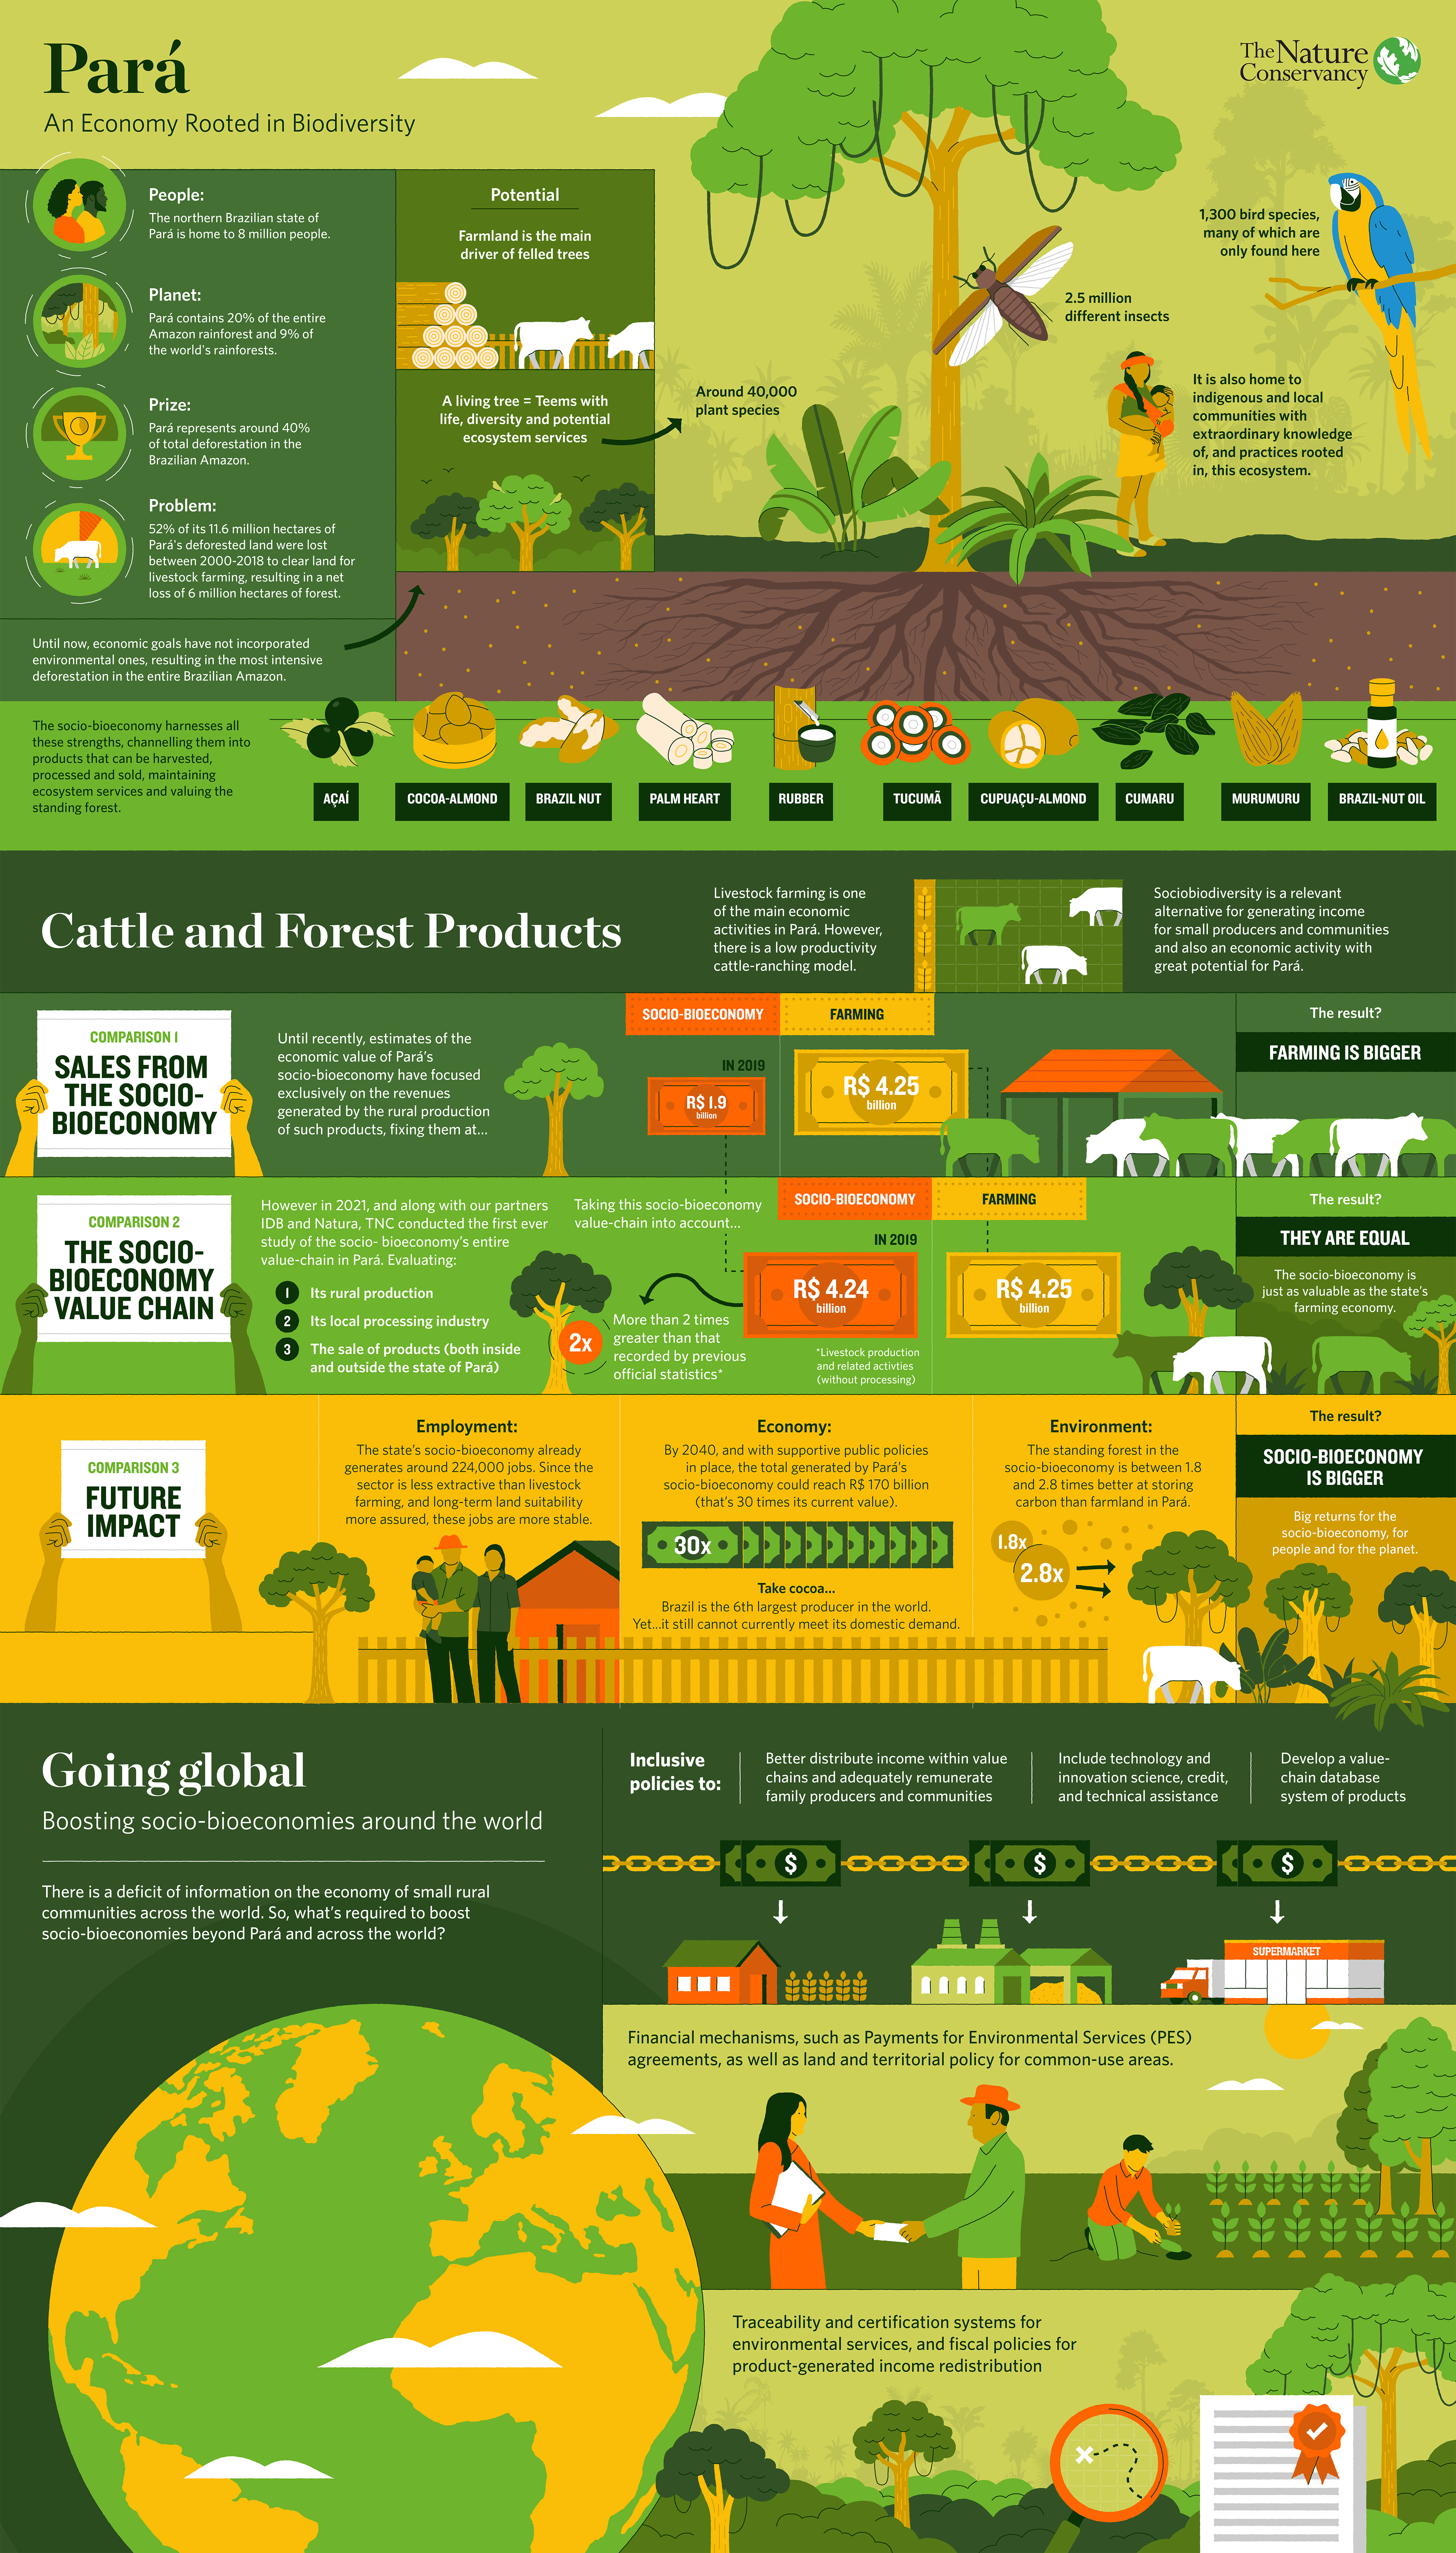 Thumbnail of a green and yellow infographic